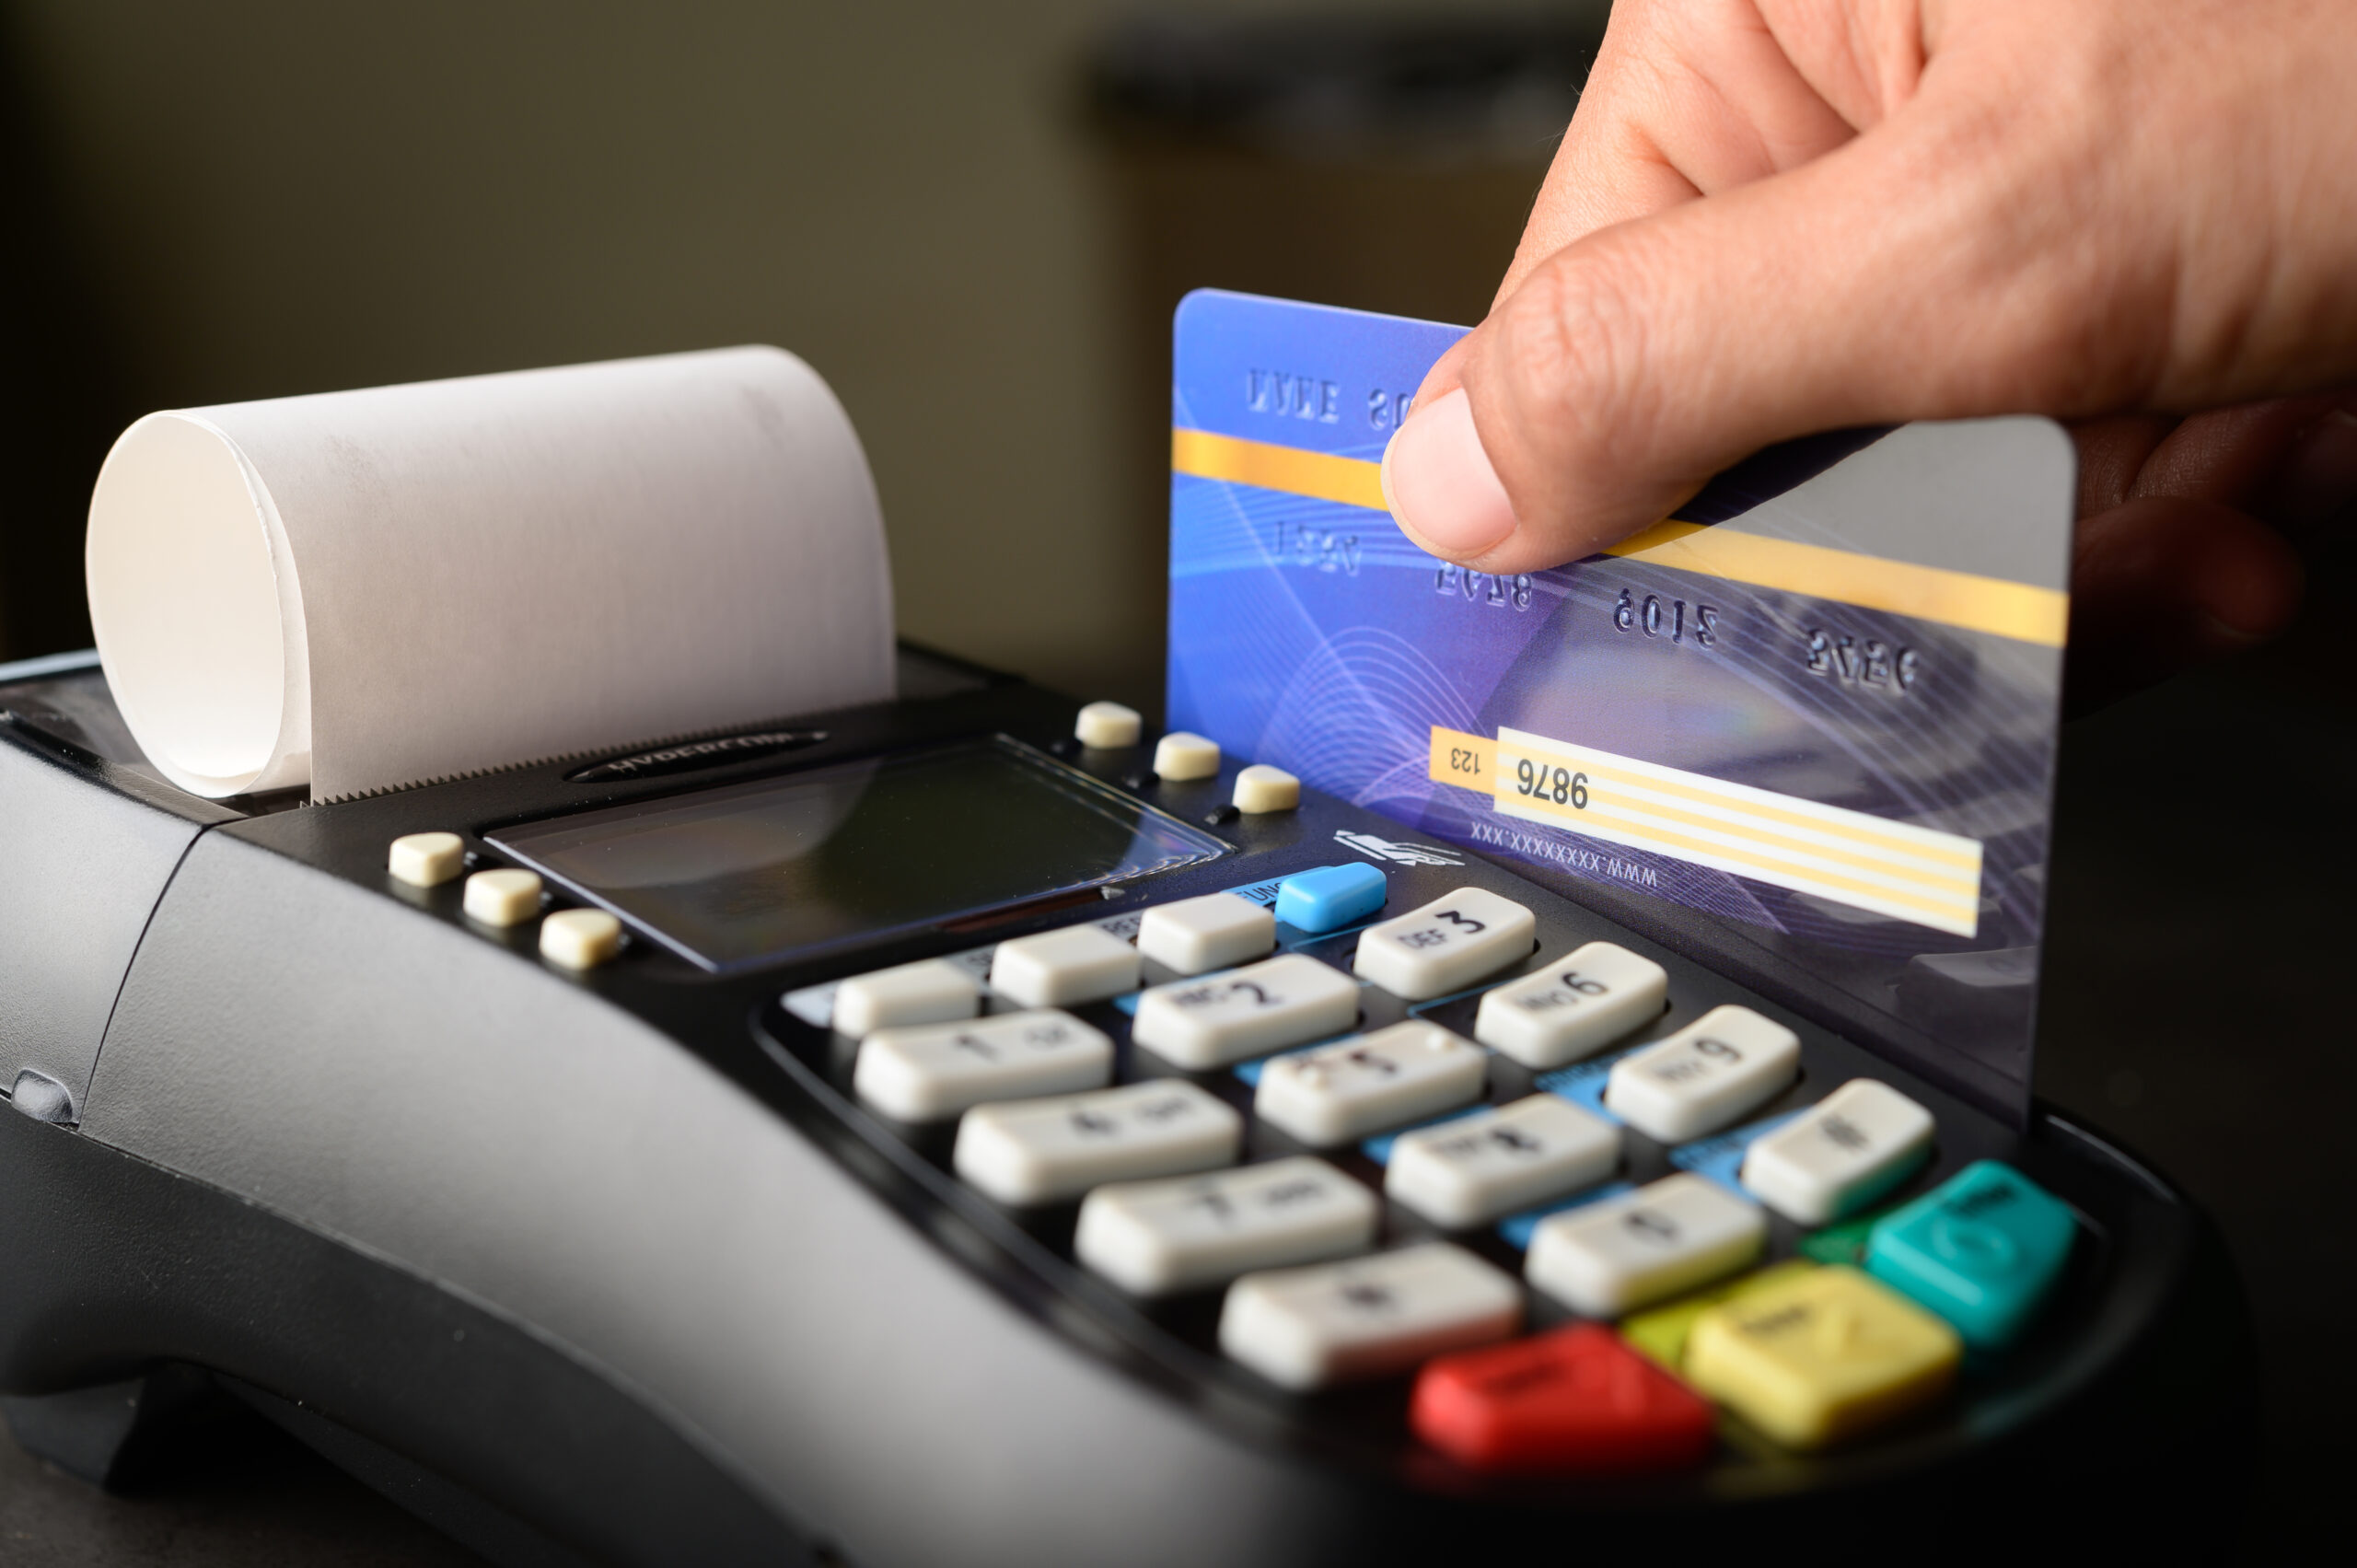 Credit card payment, buy and sell products & service,selective focus